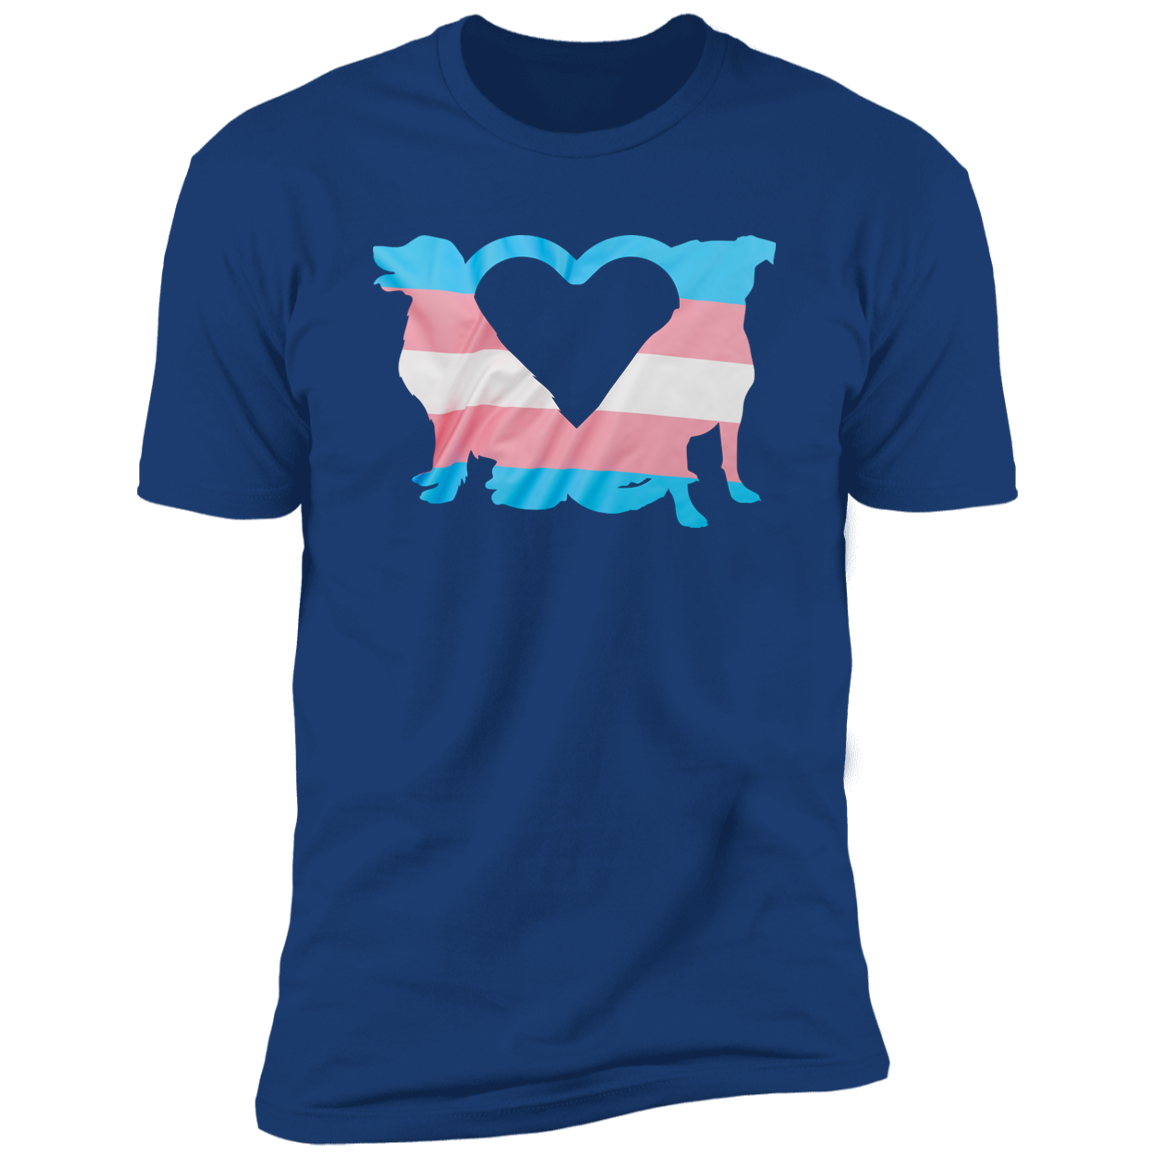 Trans Pride Dogs Heart Pride T-shirt, Trans Pride Dog Shirt for humans, in royal blue